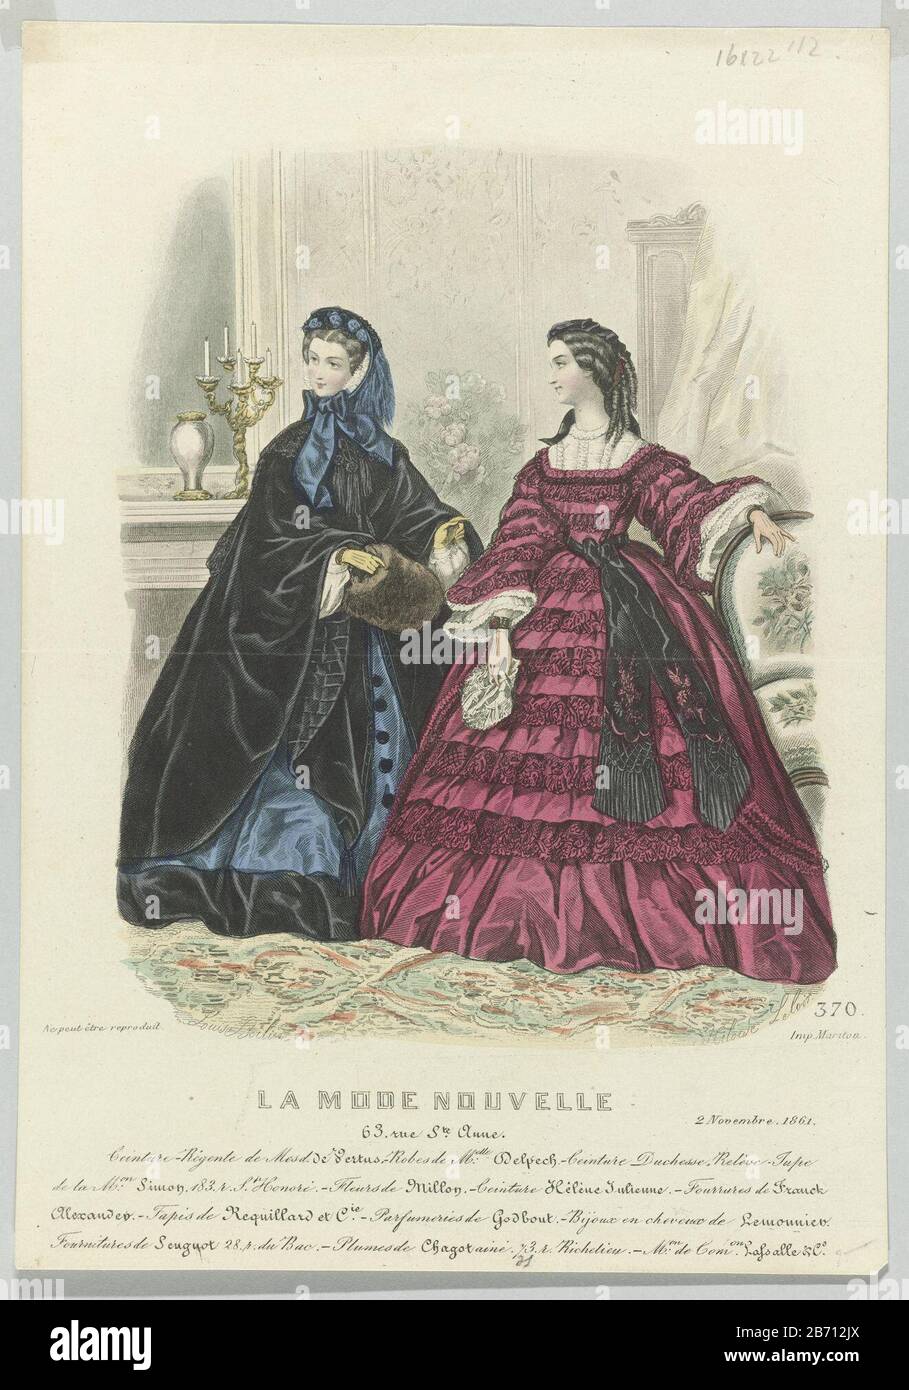 Two women in an interior gowns Delpech. Among the few lines voostelling  advertisement for various products. Print out the fashion magazine La Mode  Nouvelle (1856-1862) . Manufacturer : printmaker Louis Berlier (listed